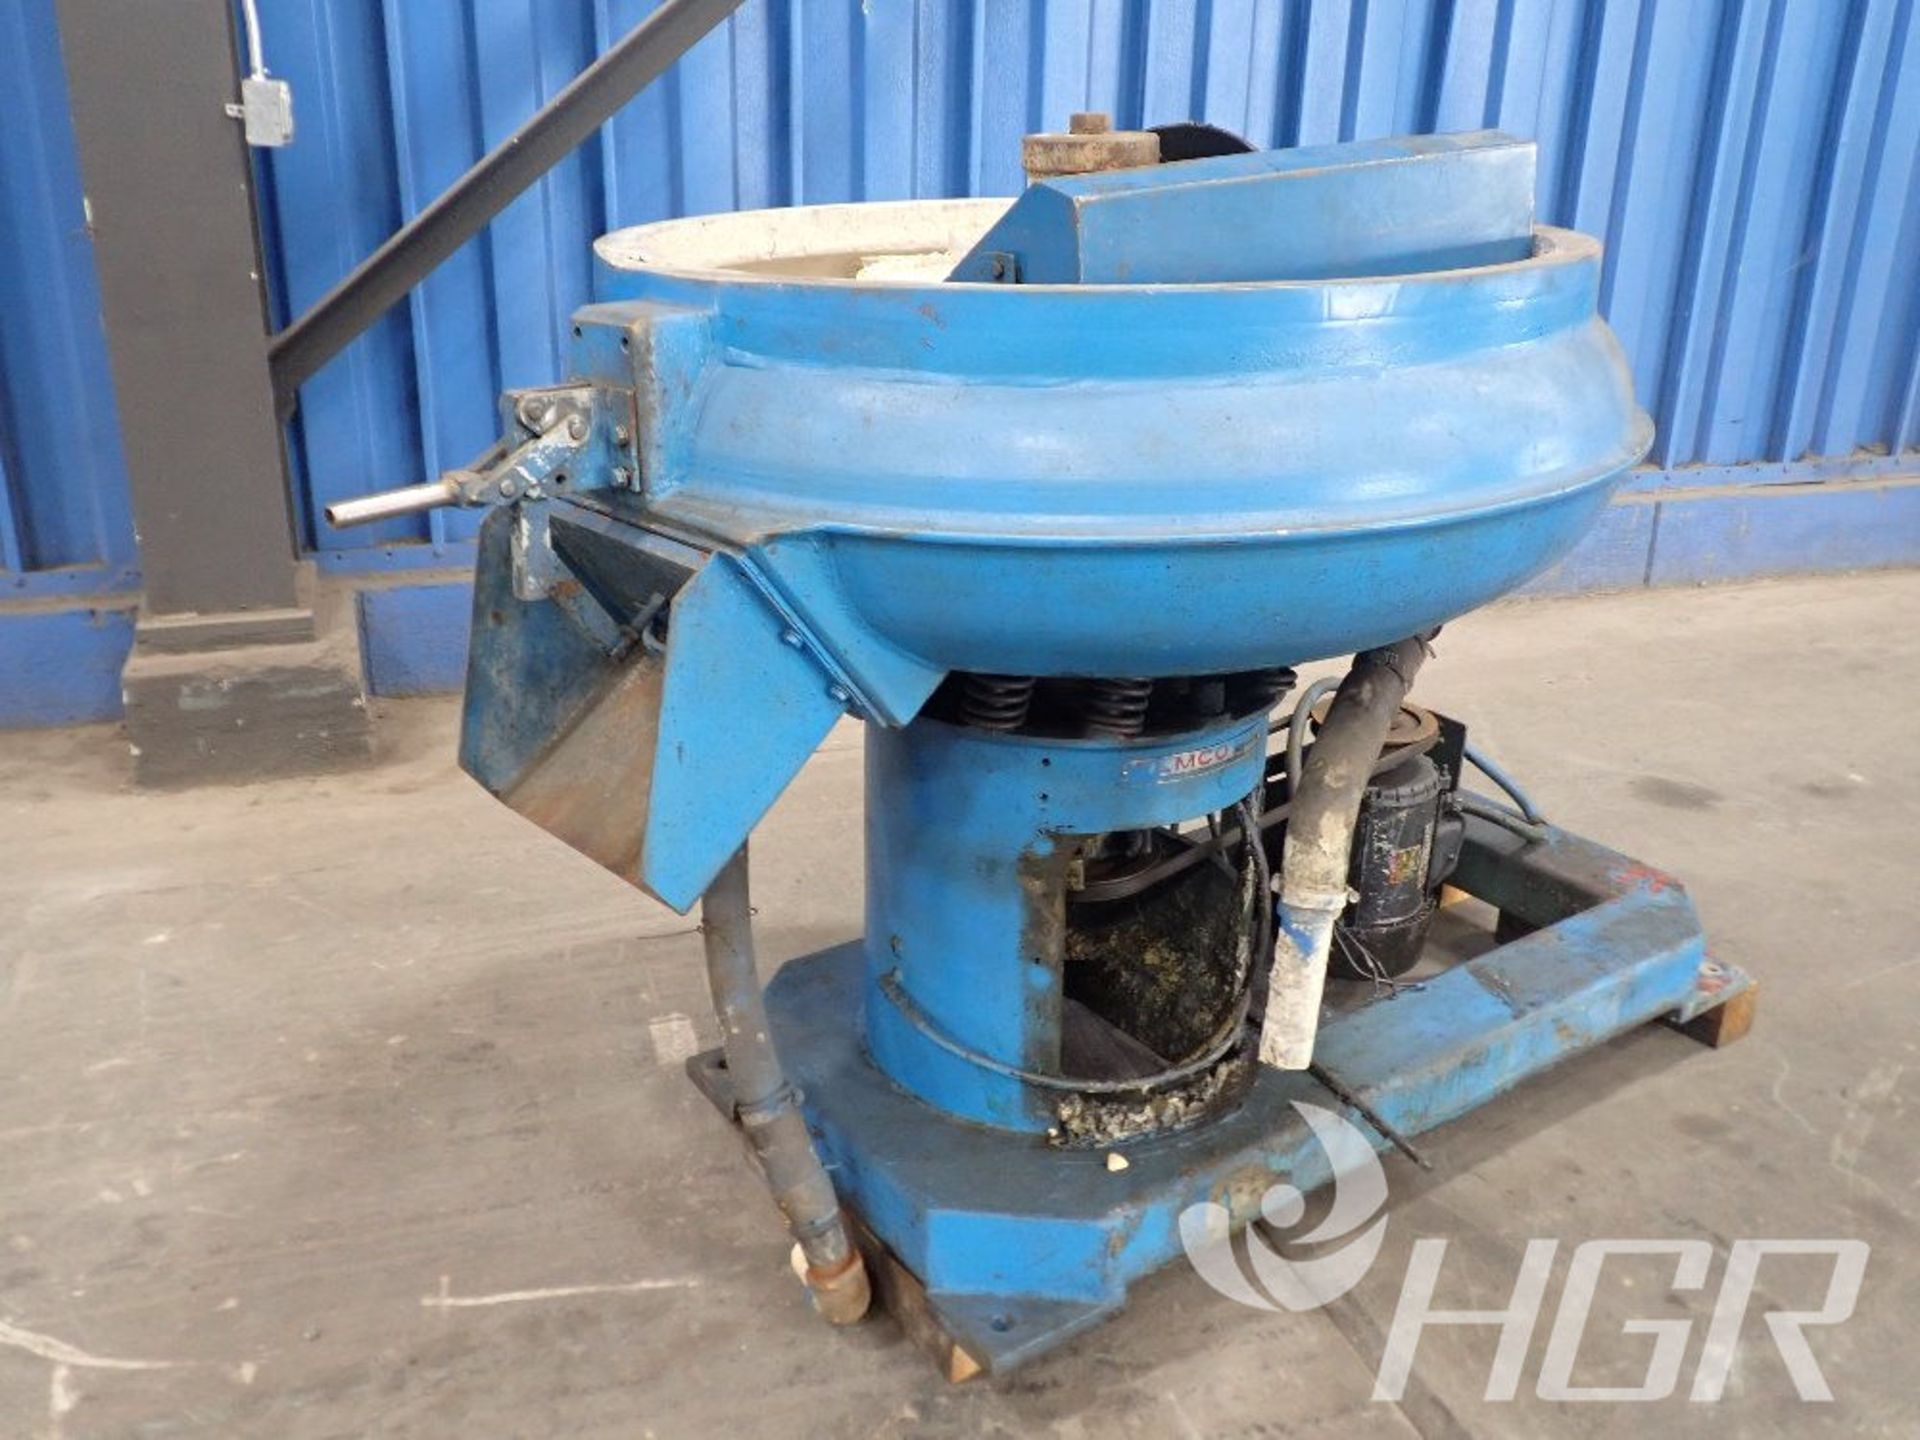 ALMCO VIBRATORY FINISHER, Model OR-5C, Date: n/a; s/n 37803, Approx. Capacity: 36", Power: n/a,